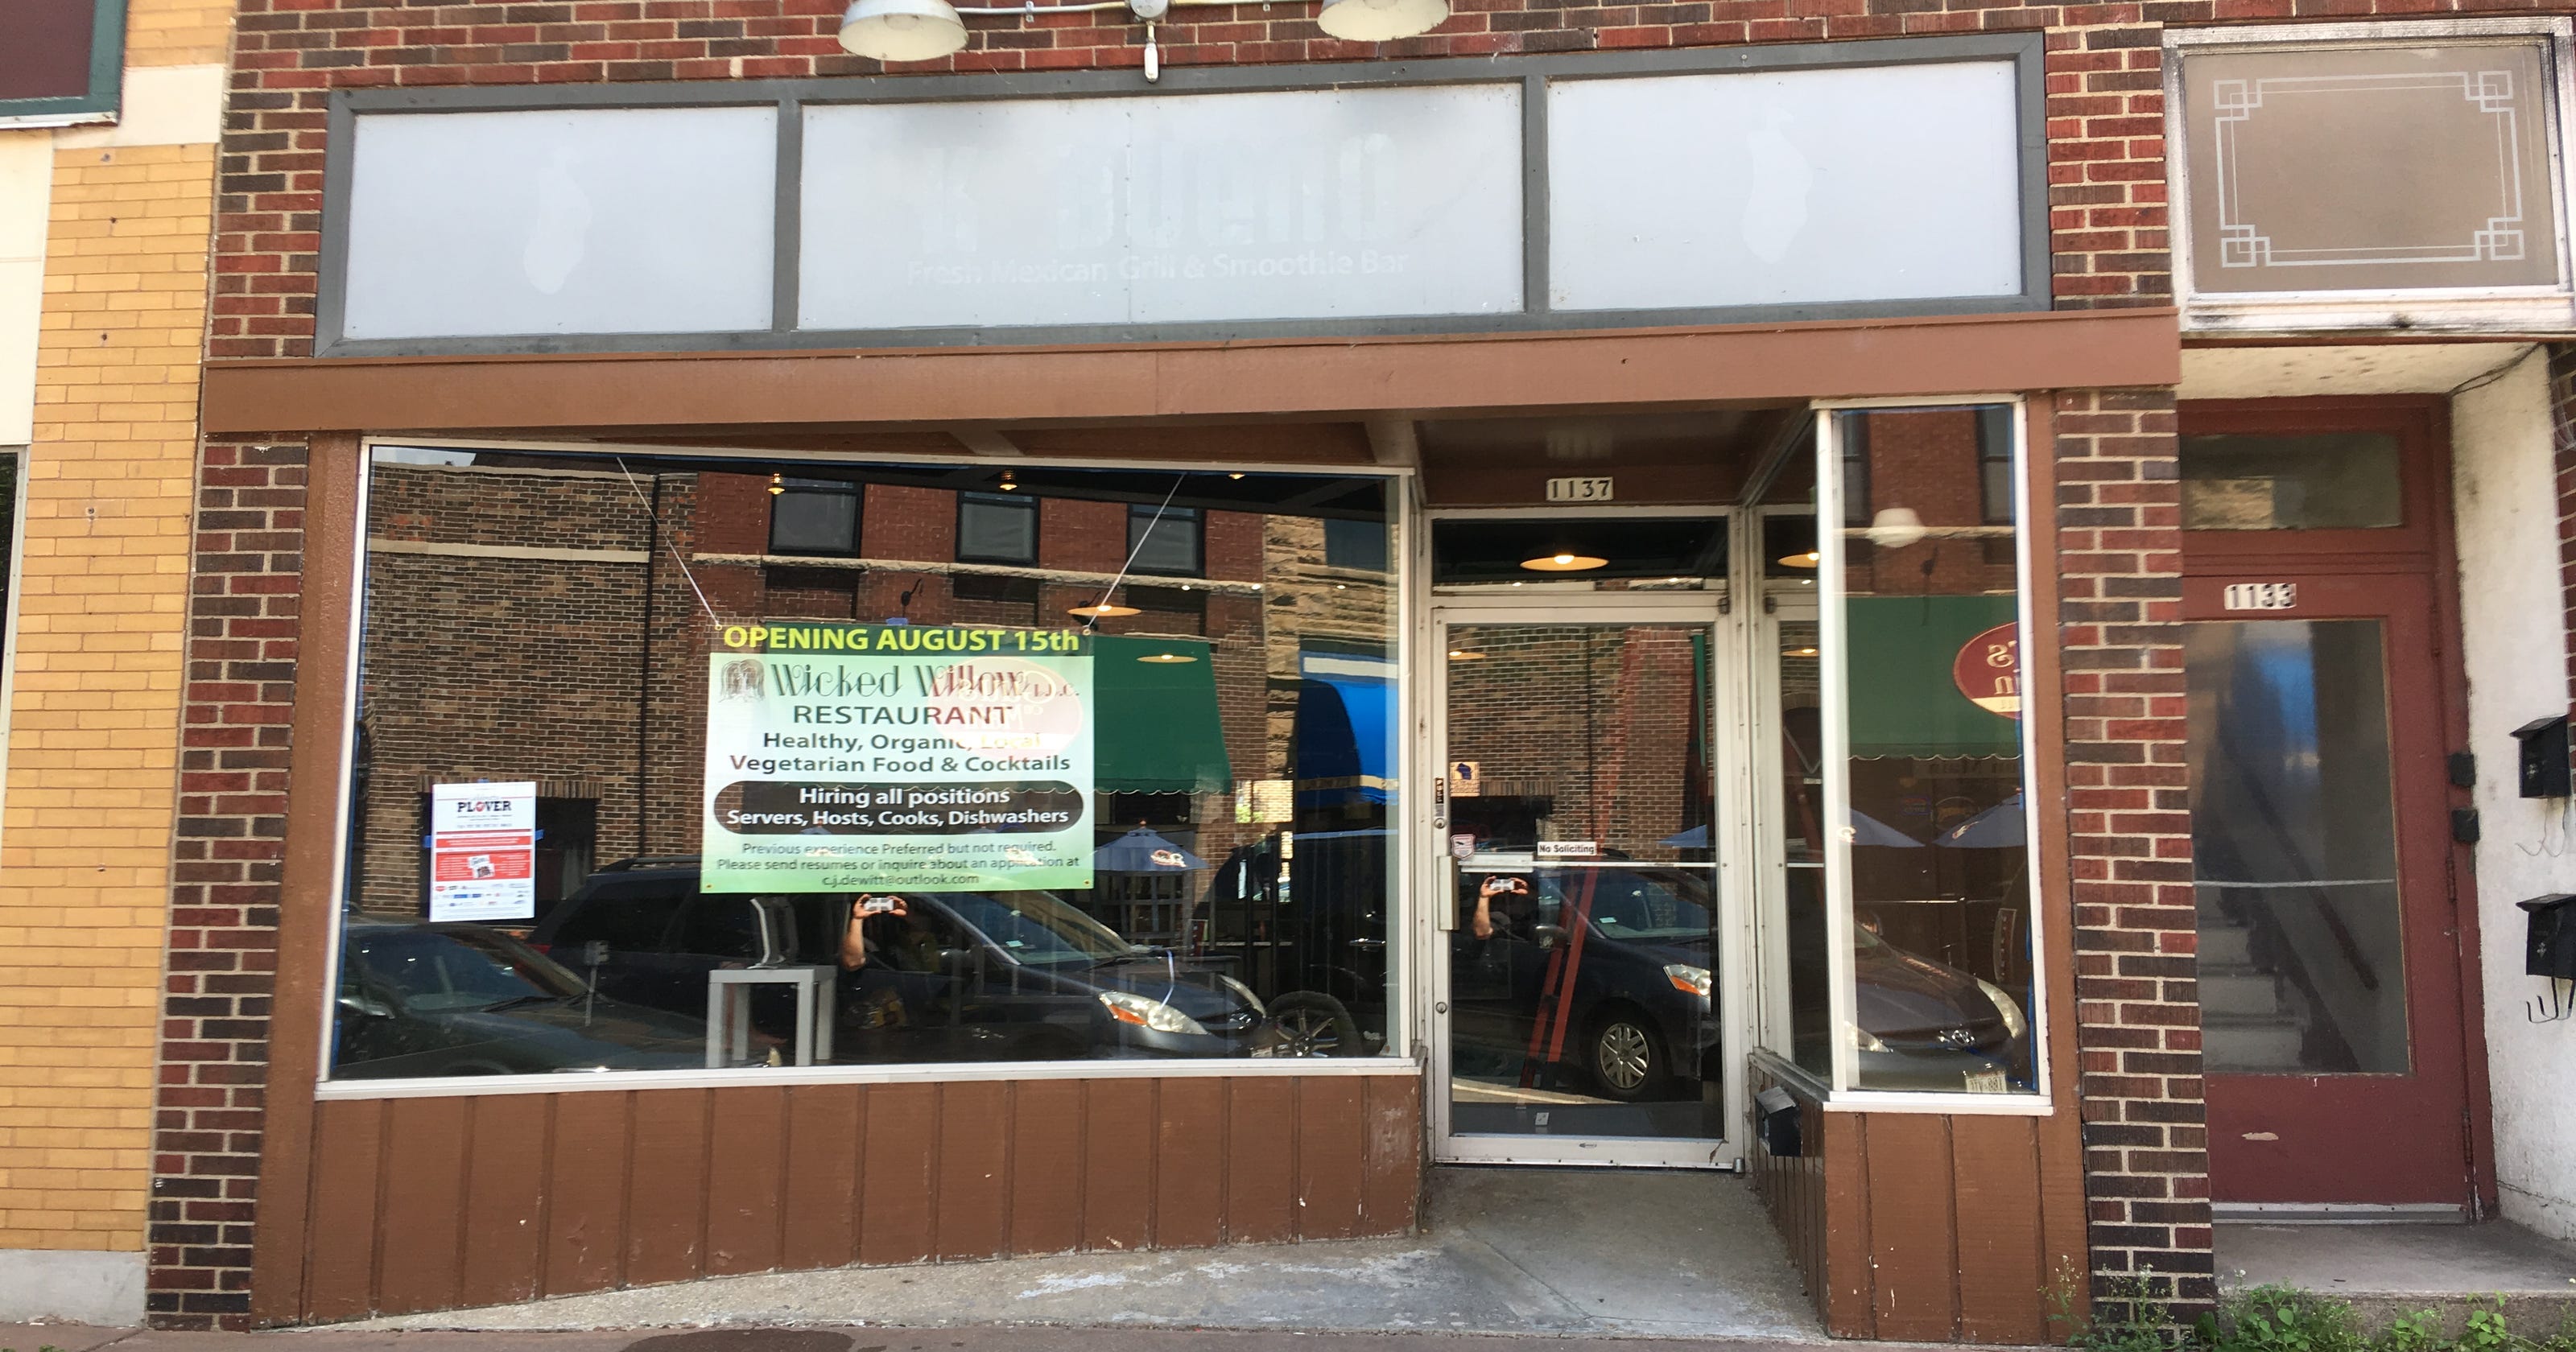 Vegetarian restaurant to open downtown on Aug. 15